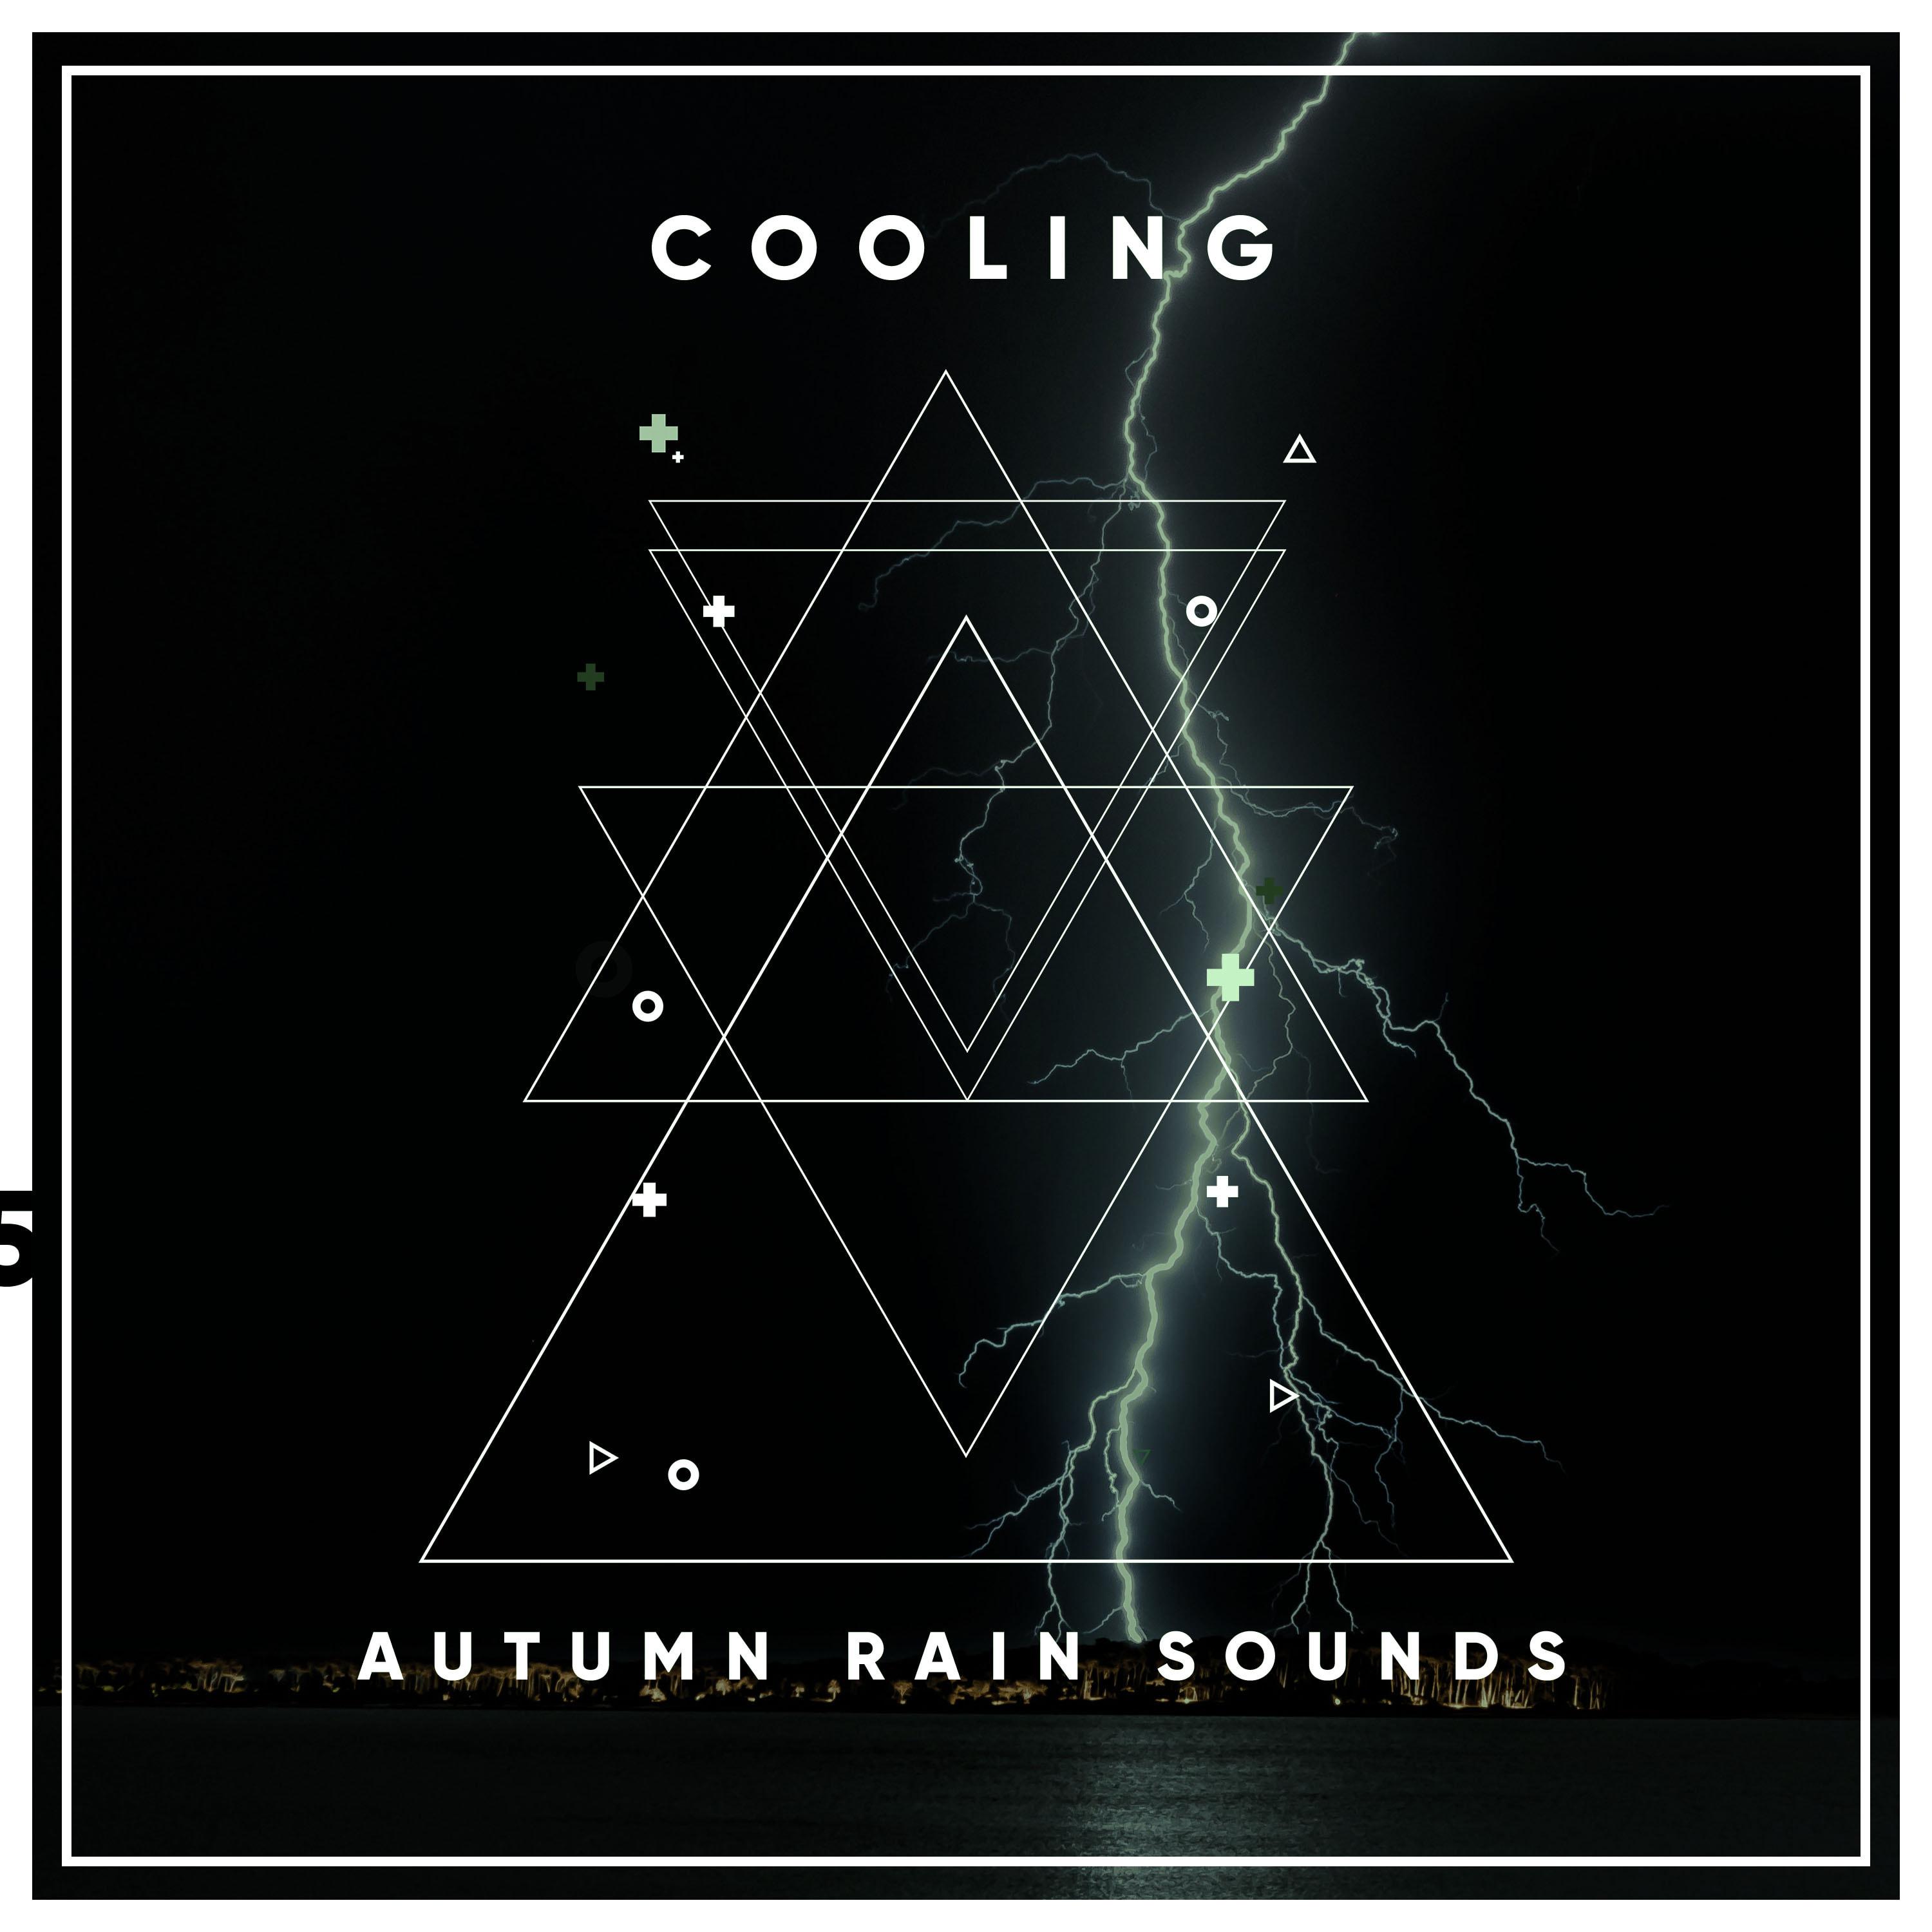 #12 Cooling Autumn Rain Sounds from Mother Nature